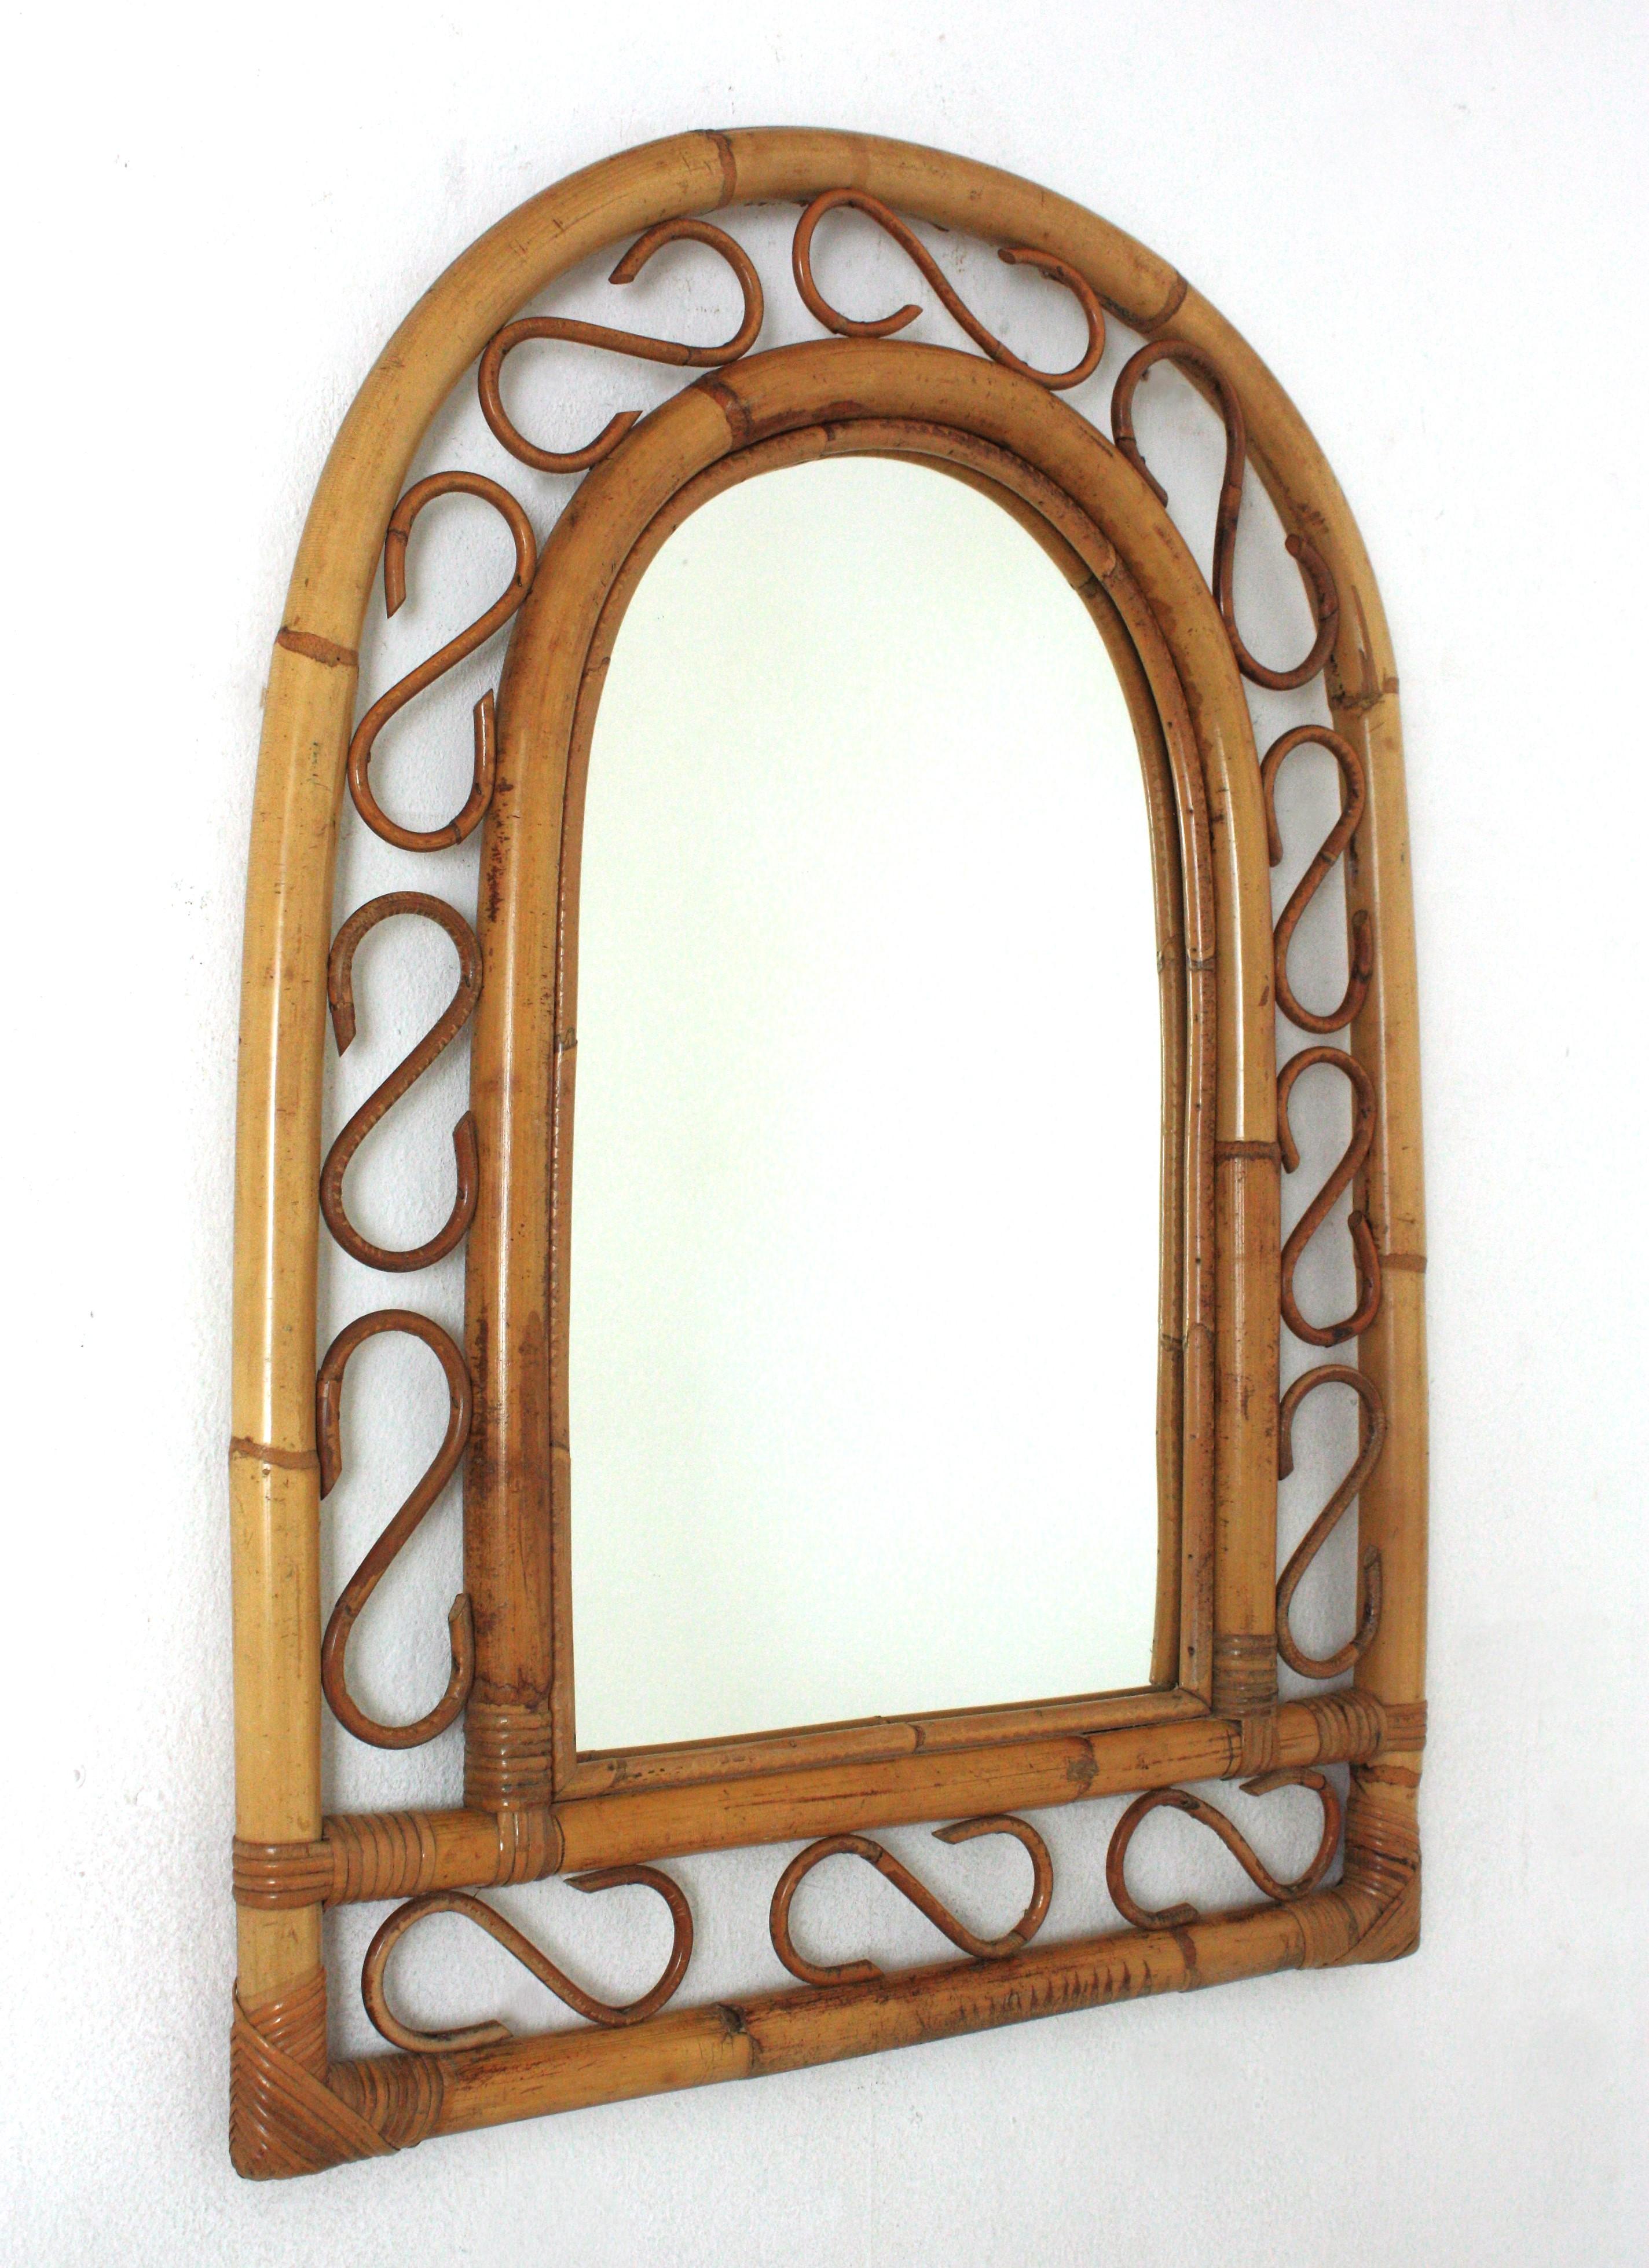 Eye-catching Mid-Century Modern Franco Albini style handcrafted bamboo and rattan mirror with arched top.
This mirror features a double bamboo frame with rattan decorative details between the bamboo canes.
This wall mirror will be a nice addition